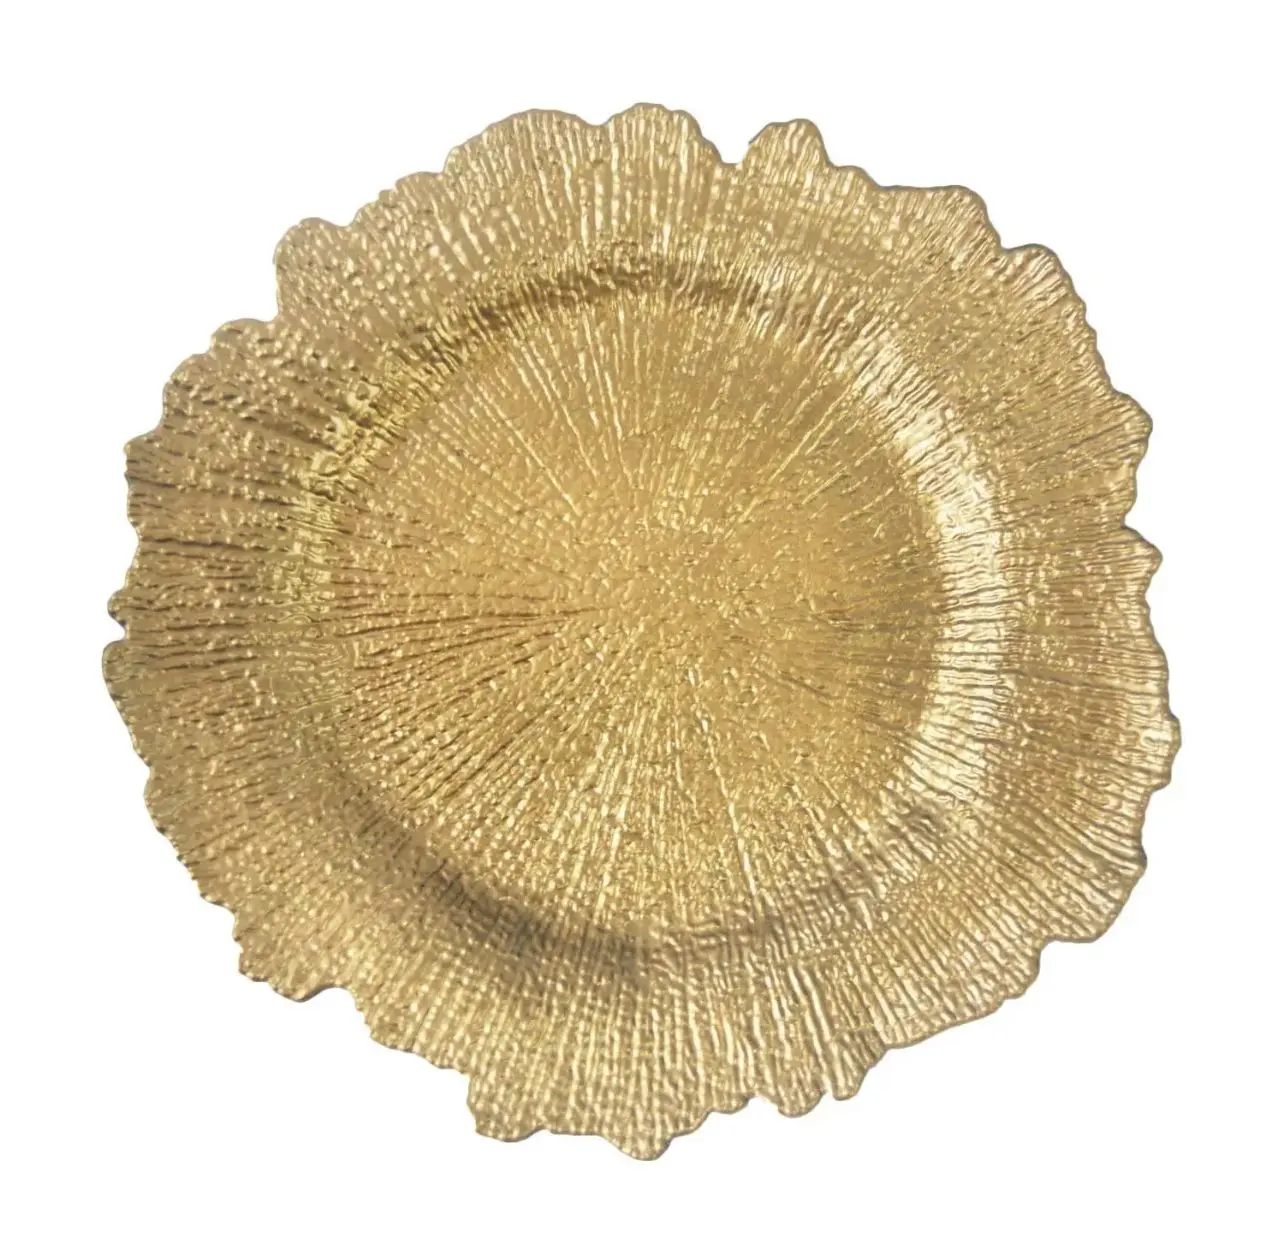 9 Inch gold silver dinner plates plastic round service base plate plastic reusable gold plastic charger platesplastic round se